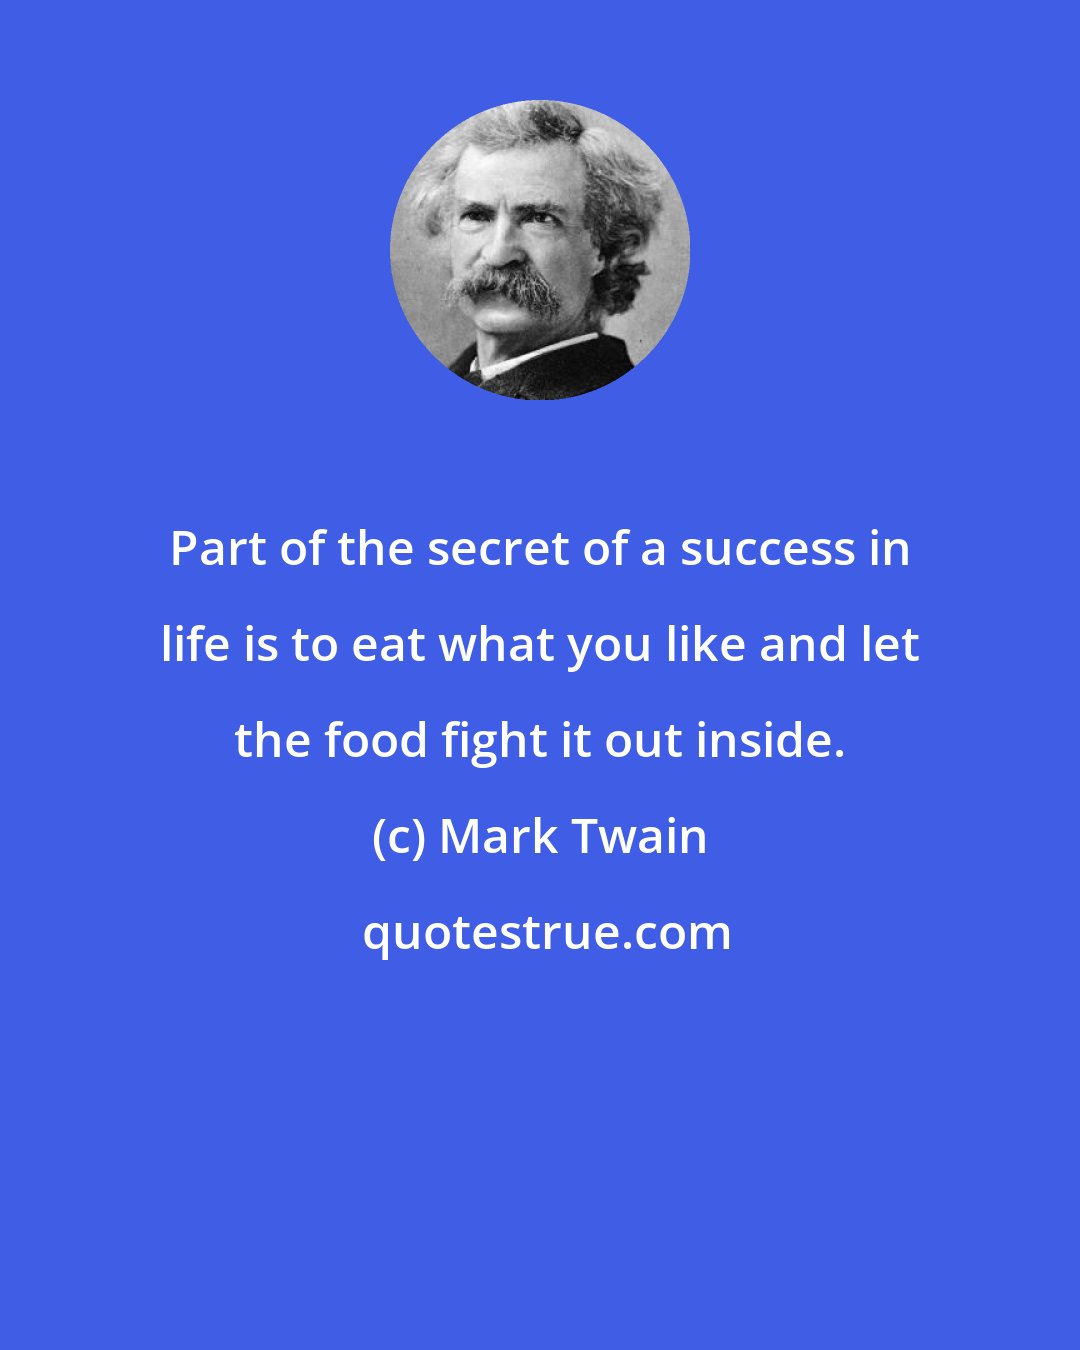 Mark Twain: Part of the secret of a success in life is to eat what you like and let the food fight it out inside.